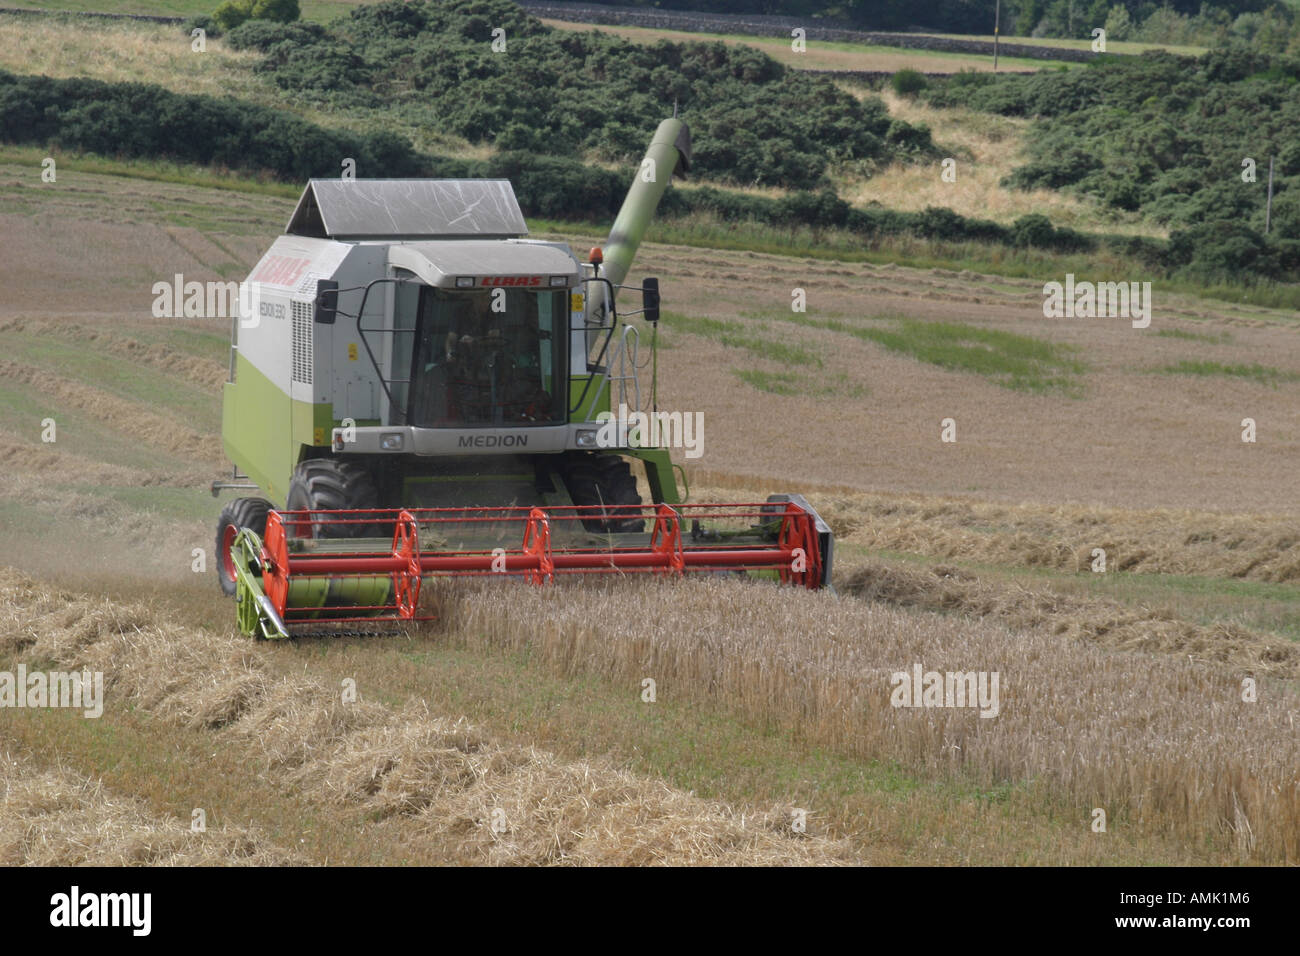 A stock photograph of a combine harvester in a field in the uk Stock Photo